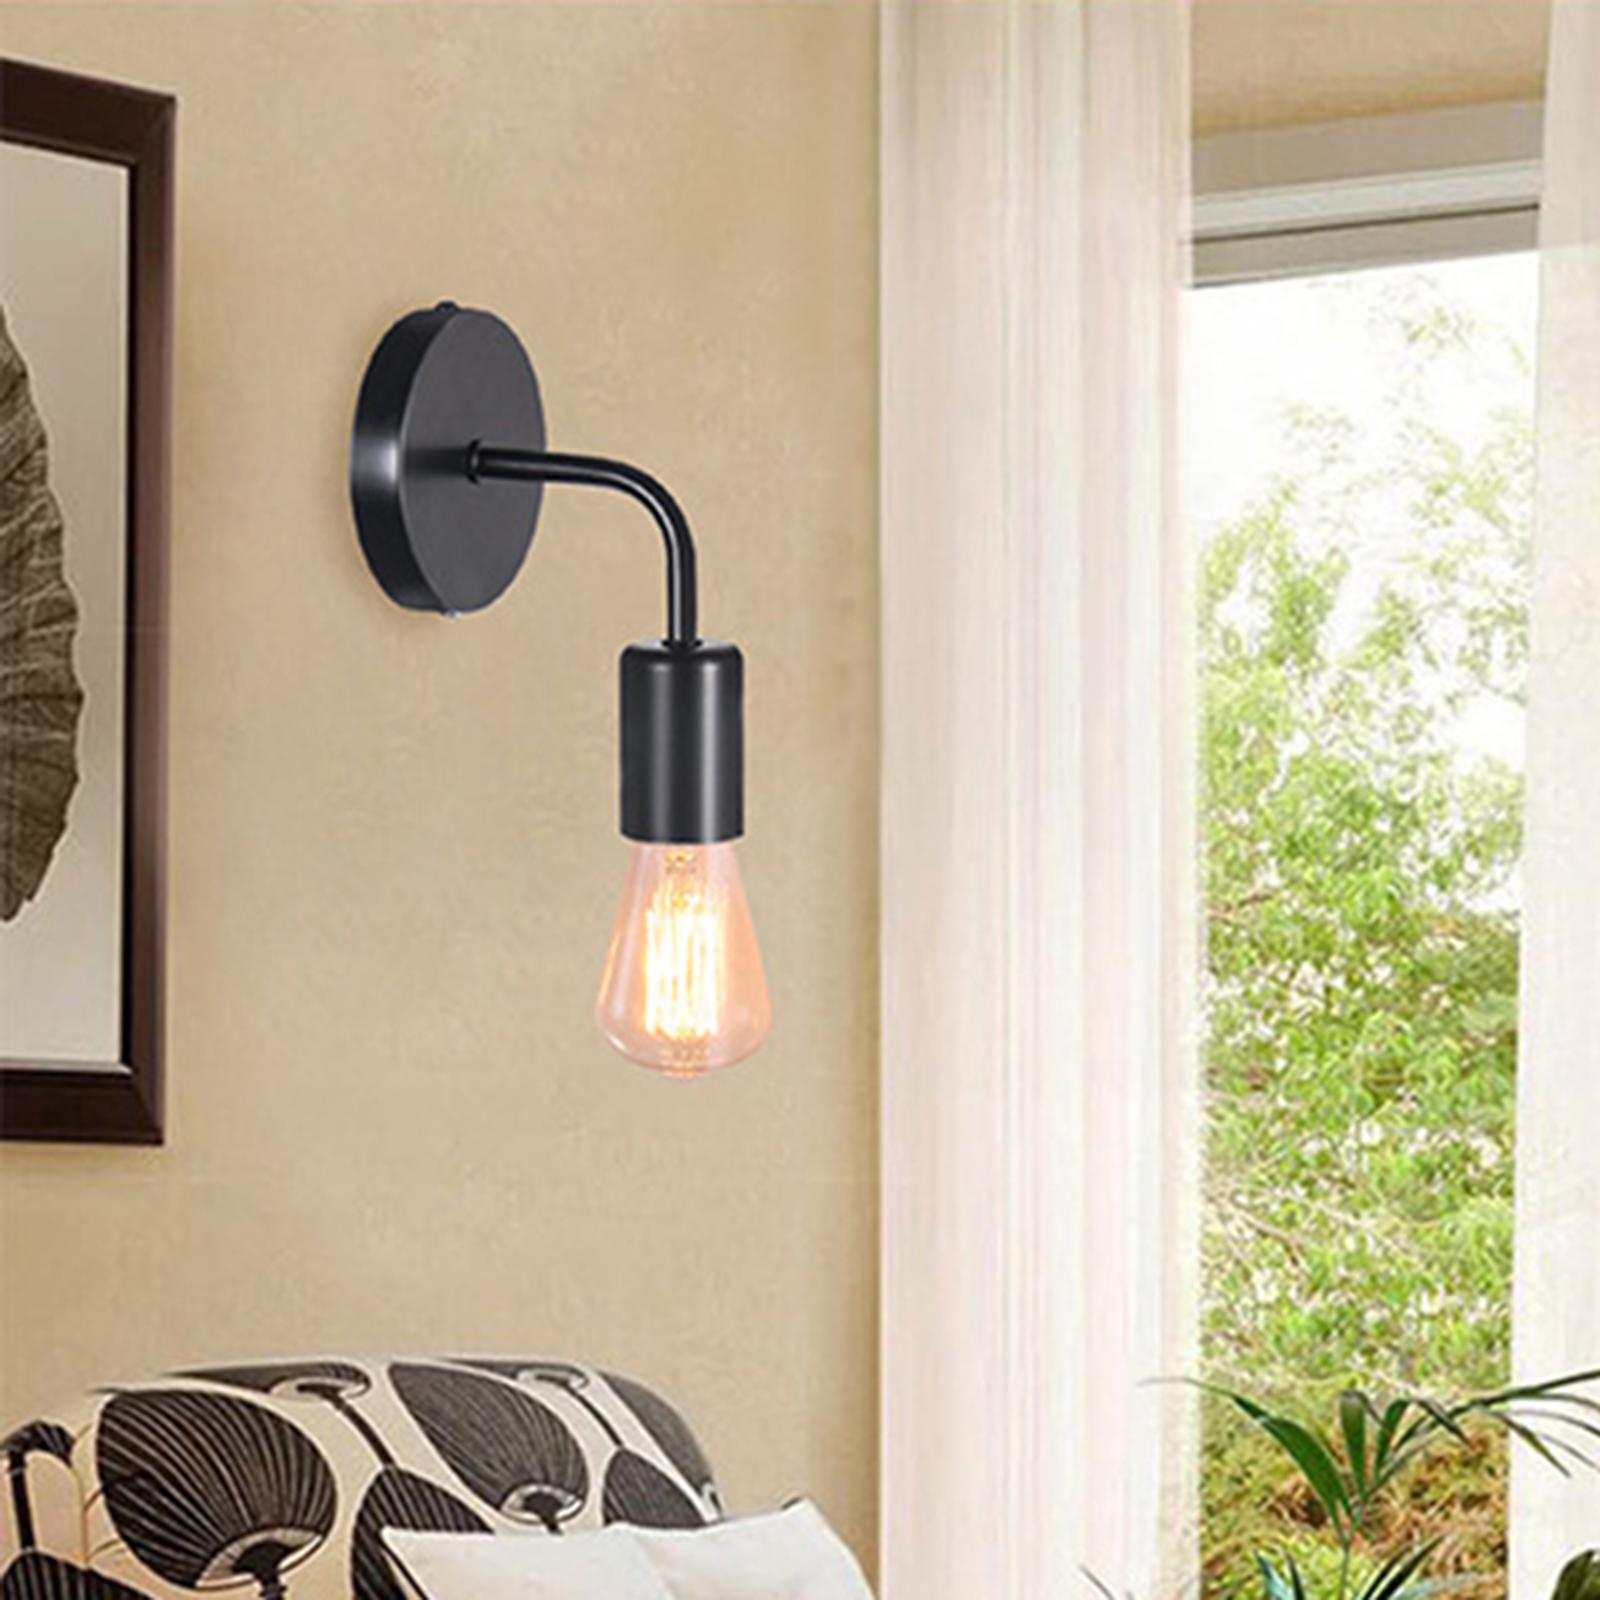 Dovewill Wall Sconce Wall Lamp Decoration LED Wall Light Fixture Kitchen